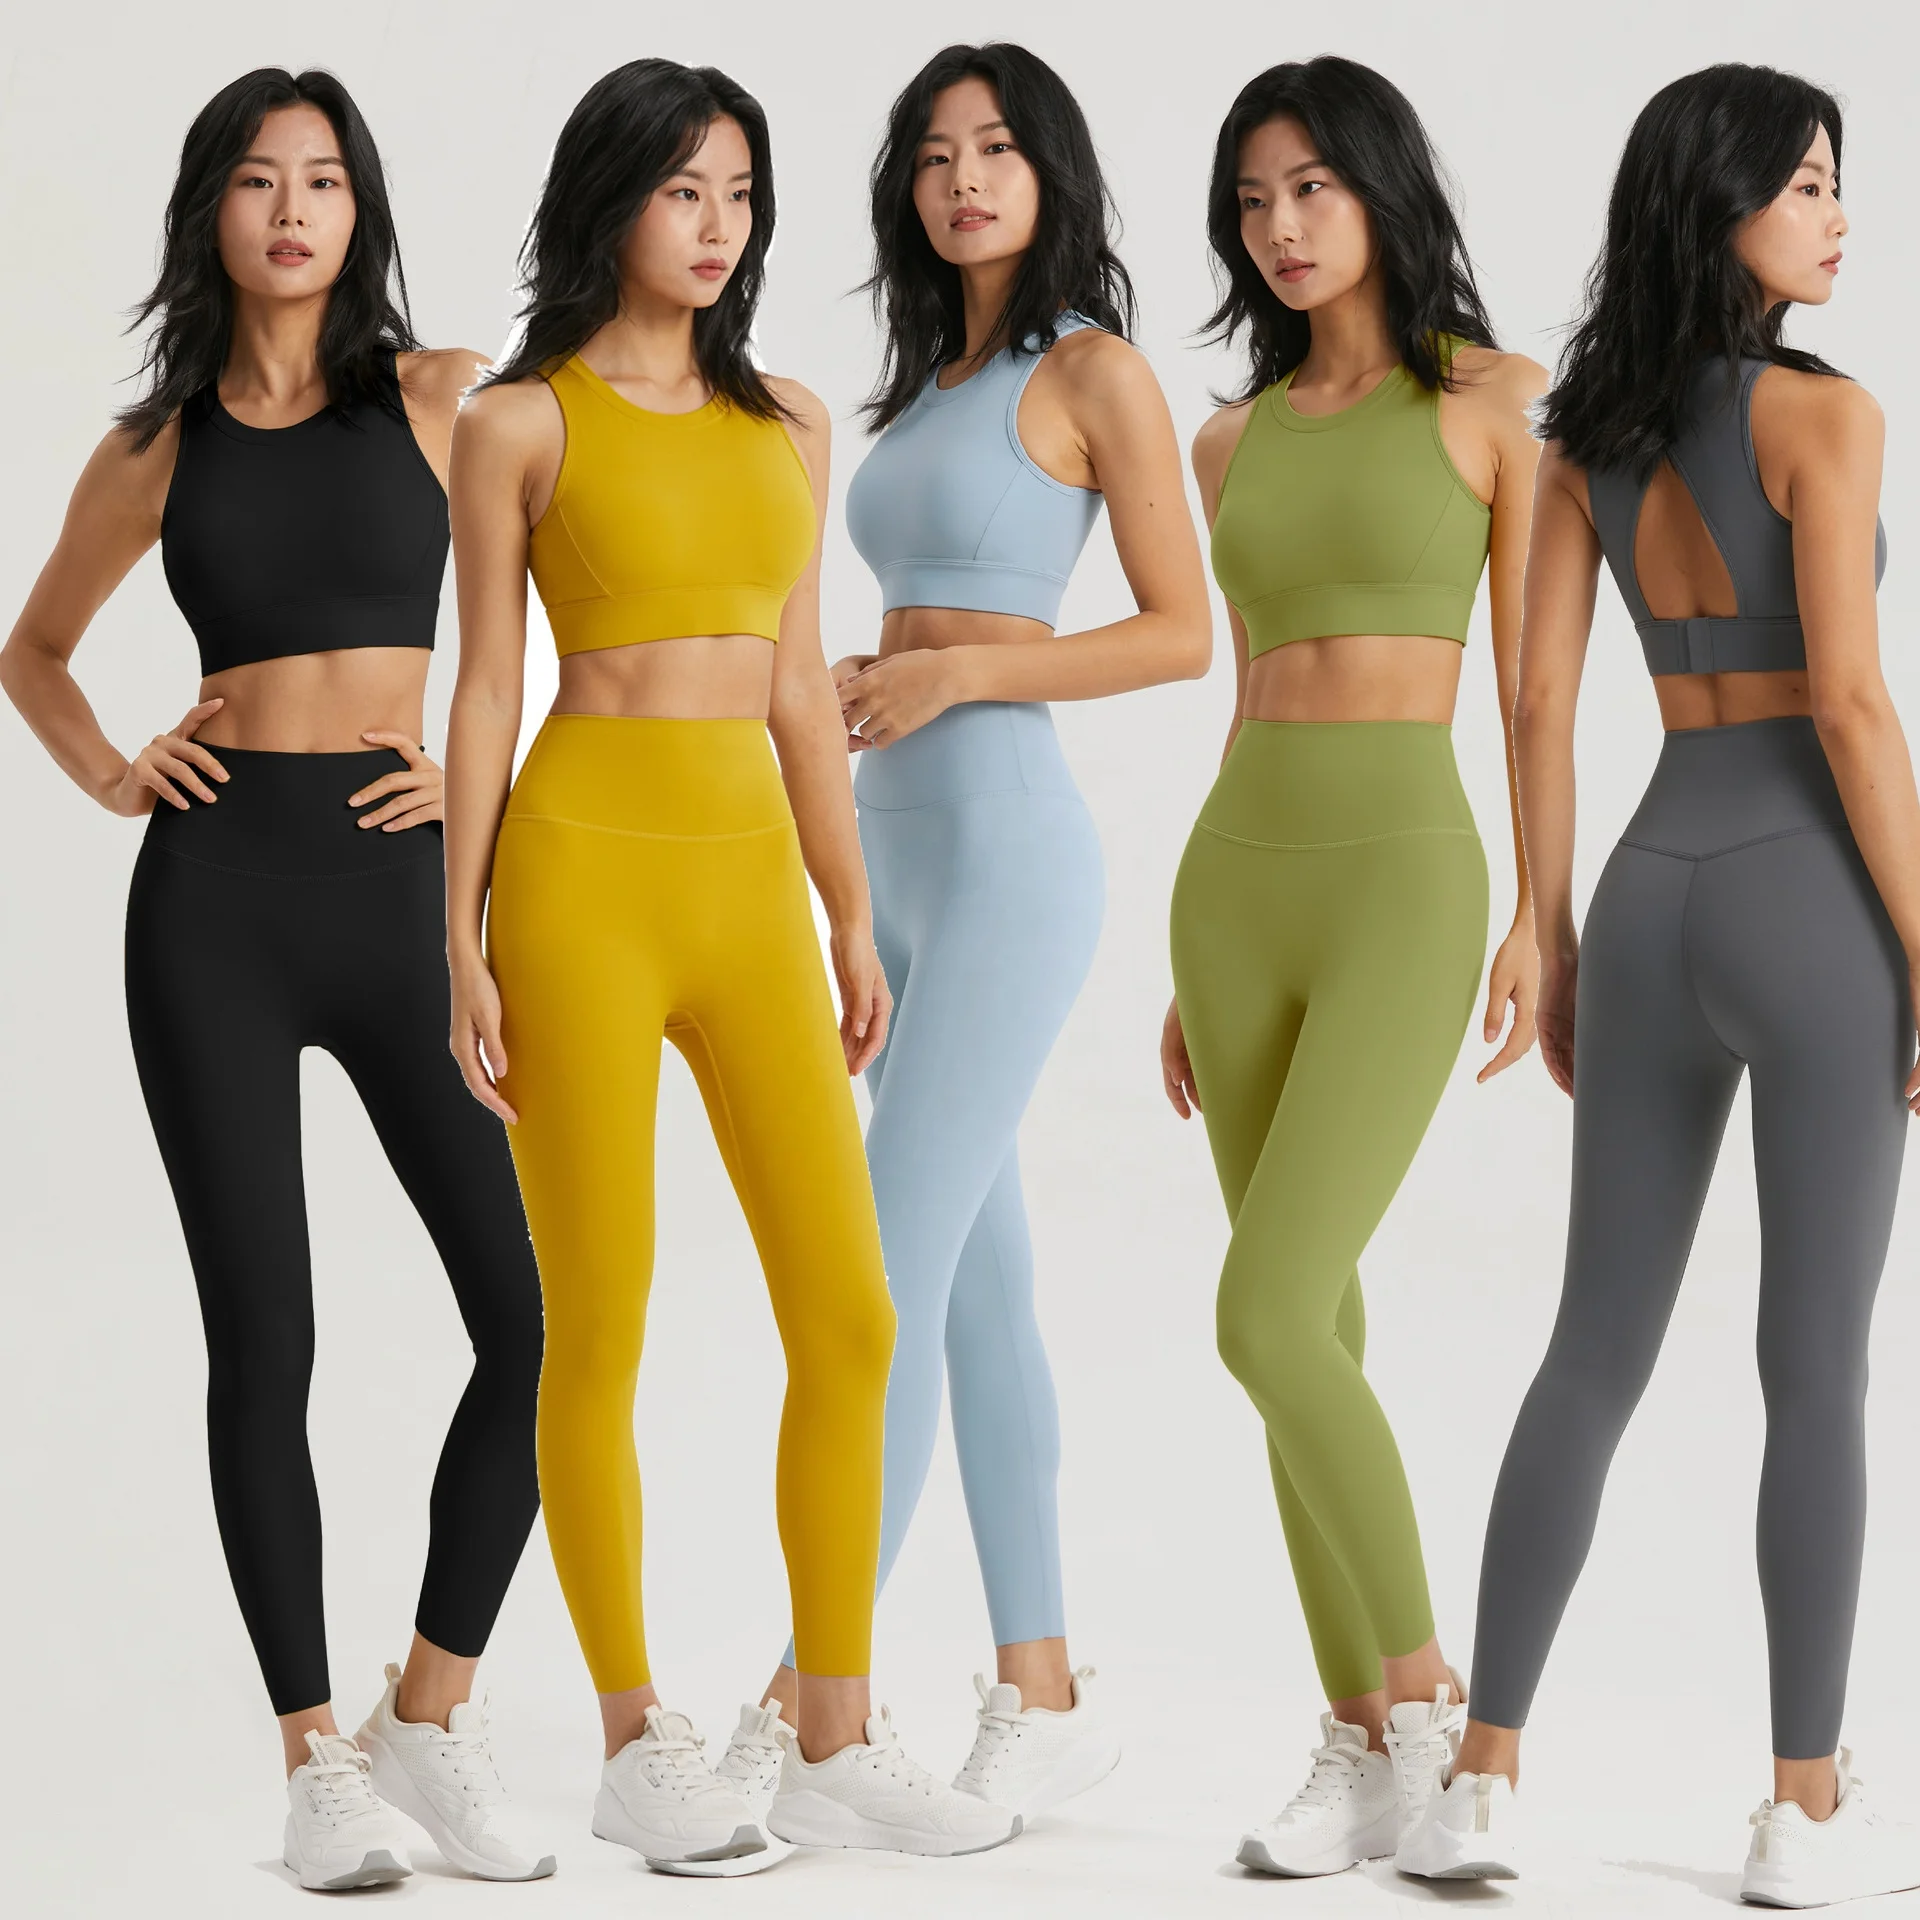 YIYI Adjustable Open Back High Support Sports Bra Gym Fitness Sets No Front Stitch Line Leggings Sets For Women Female Gym Wear